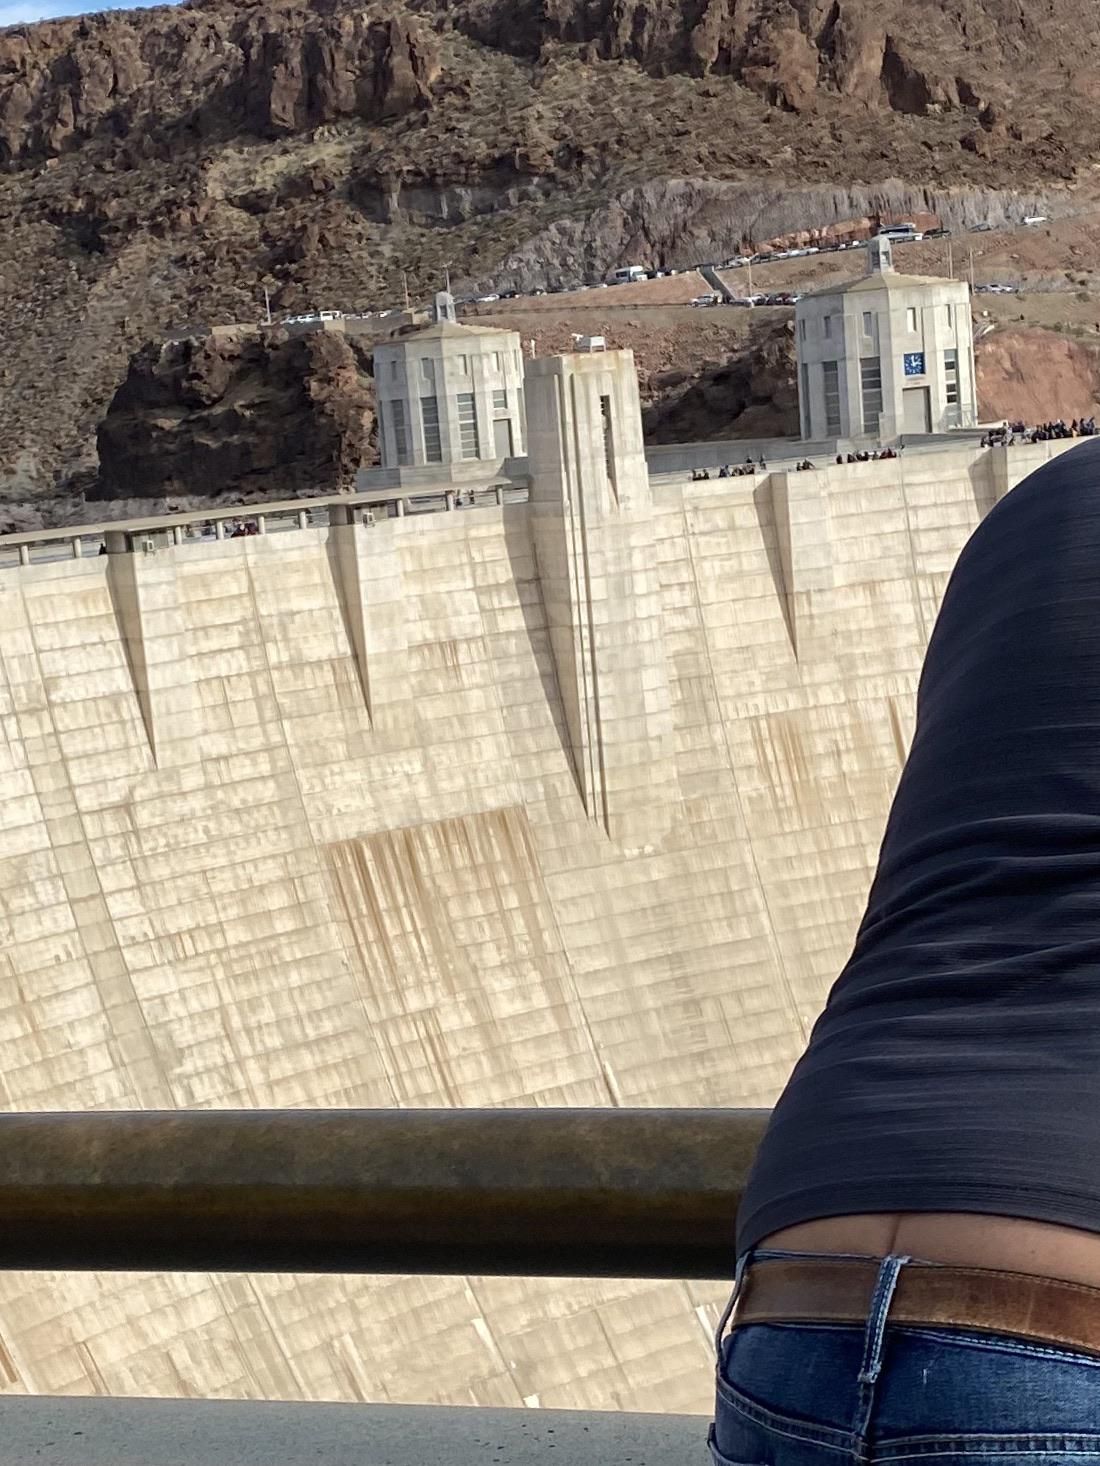 Saw a crack in the Hoover Dam